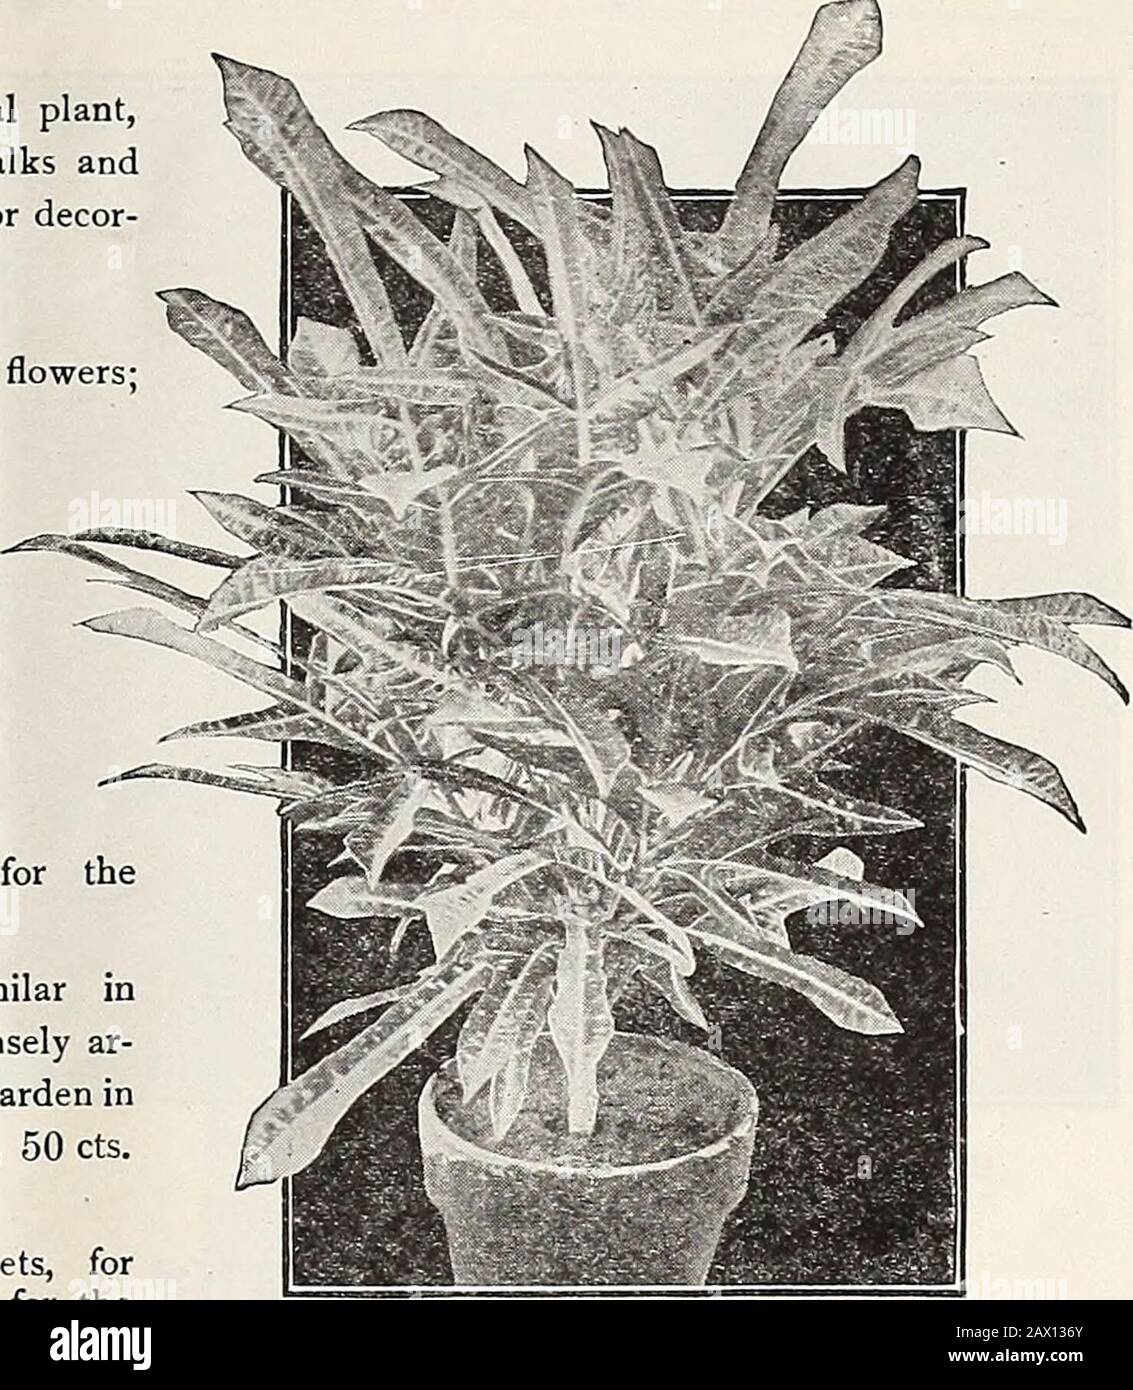 Dreer's autumn catalogue 1920 . each; $5.00 per doz. ASPARAGUS Plumosa Nanus {Asparagus Fern). If there is abetter plantfor table decoration than tliis we do not know it. The foliage ismore delicate than that of the finest Fern, being lace-like in itsfilminess. A plant with half a dozen stalks is a mass of daintymisty green, among which the stems of a few flowers can bethrust in such a laanner as to make a pretty decorationtable. 25 cts. and 50 cts. each; $2.50 and $5.00 per doz. Scandens Deflexus. This new decorative variety is similar inhabit of growth to Sprengeri, but with finer light gree Stock Photo